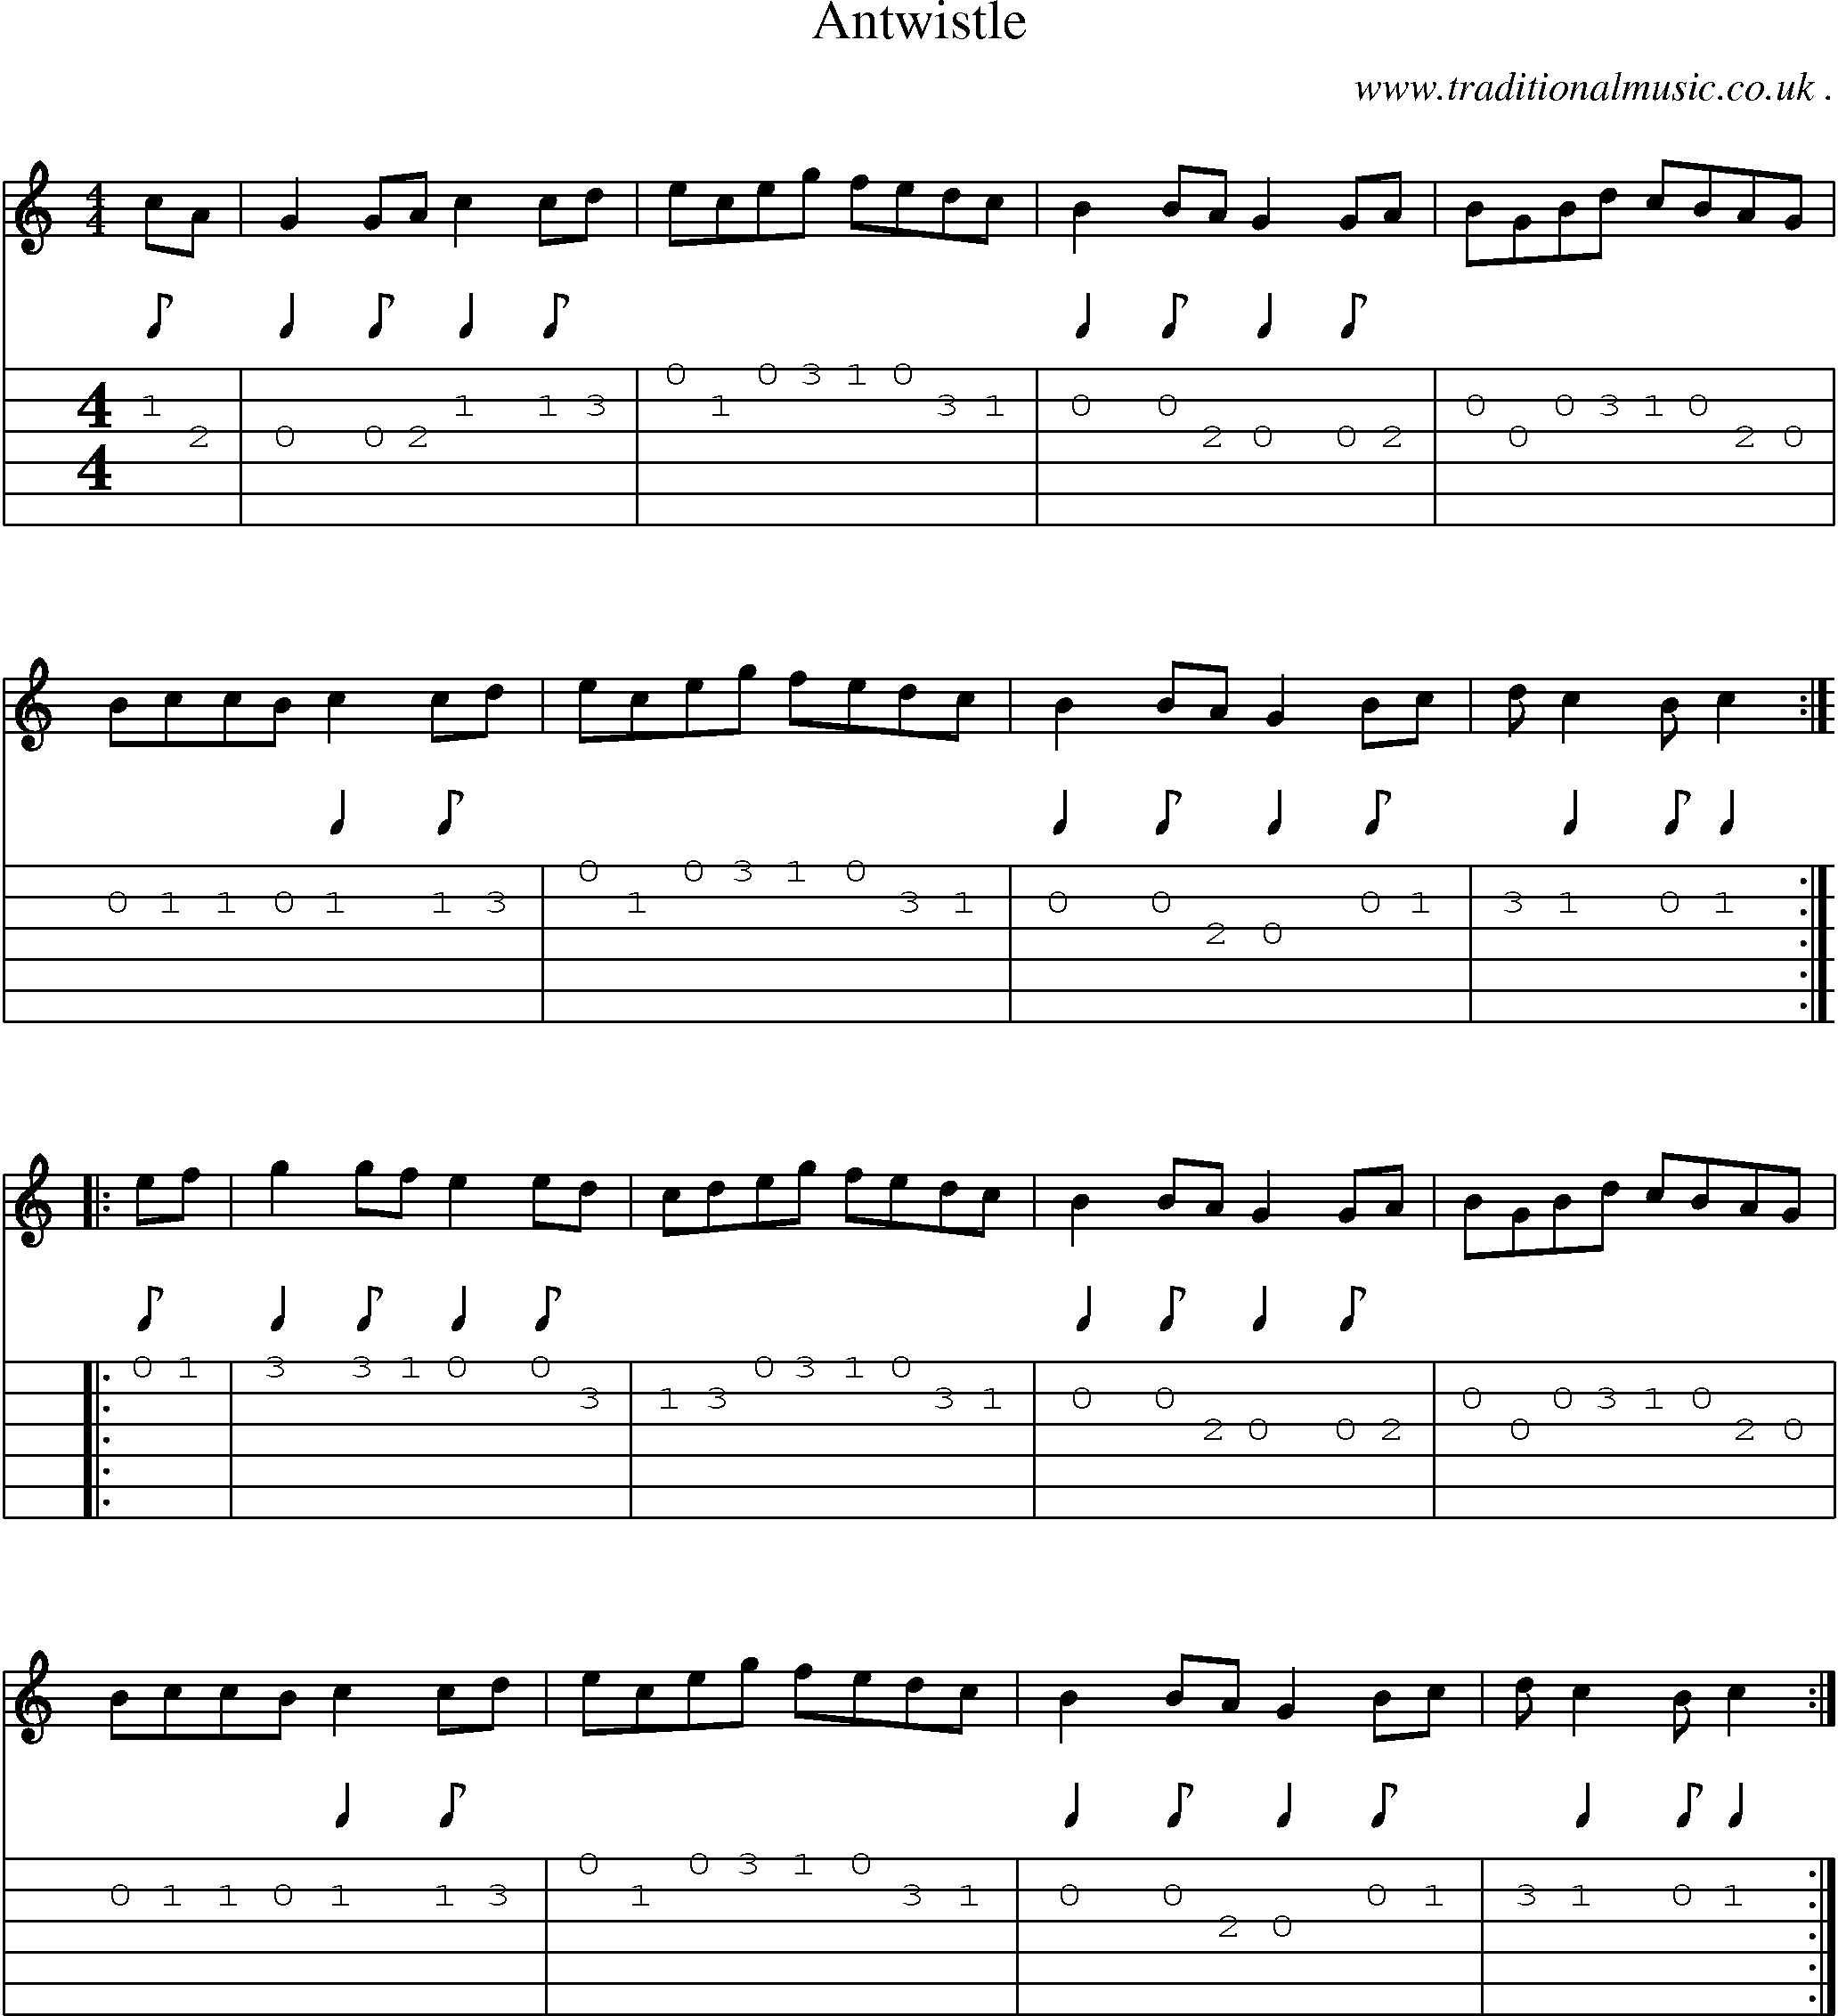 Sheet-Music and Guitar Tabs for Antwistle